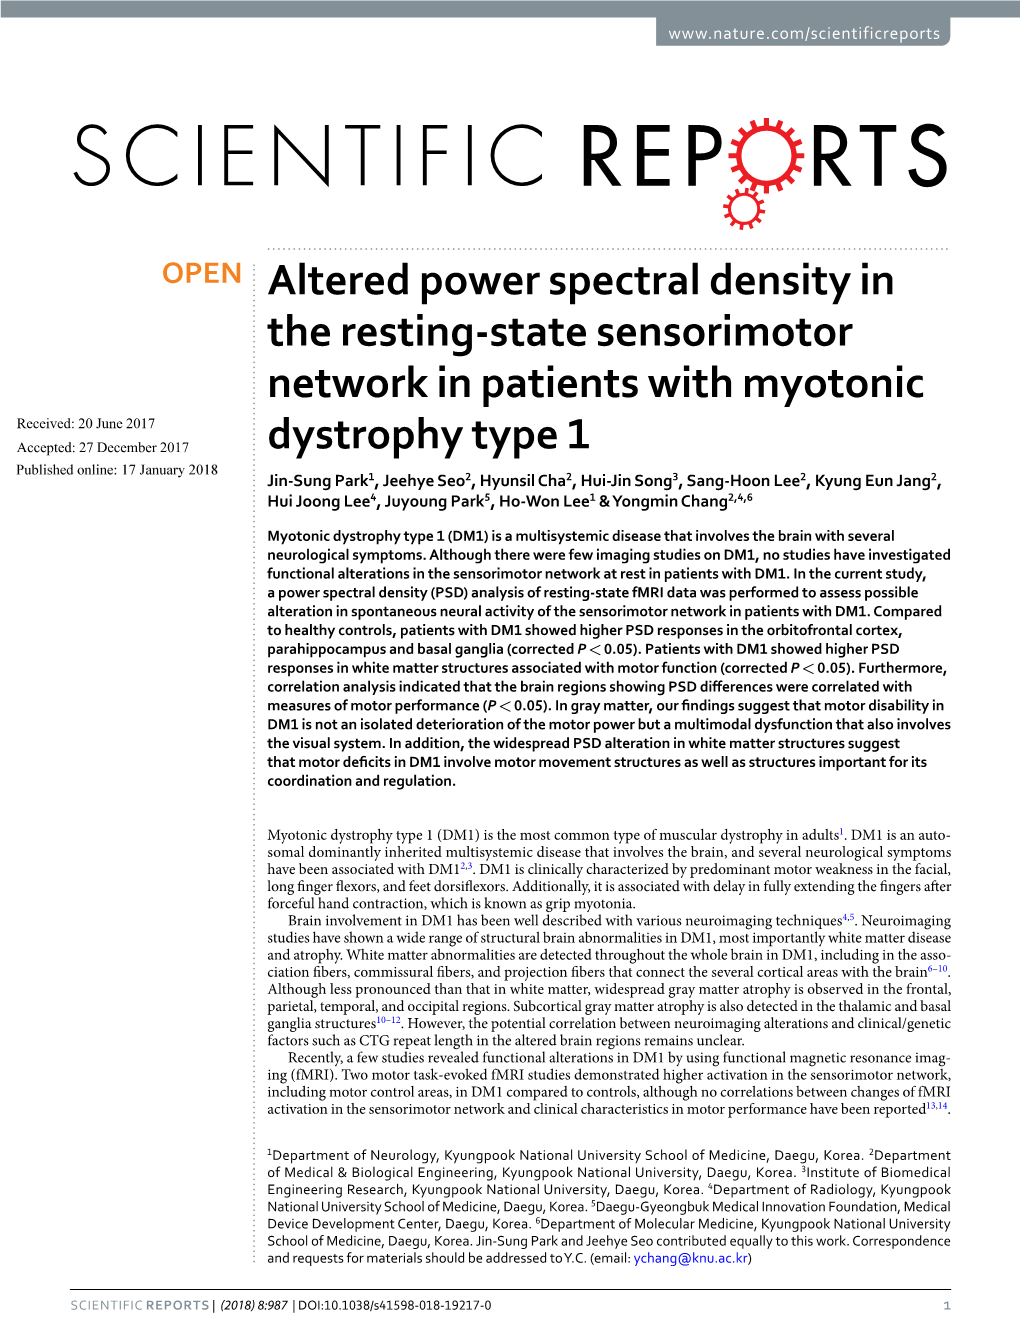 Altered Power Spectral Density in the Resting-State Sensorimotor Network in Patients with Myotonic Dystrophy Type 1